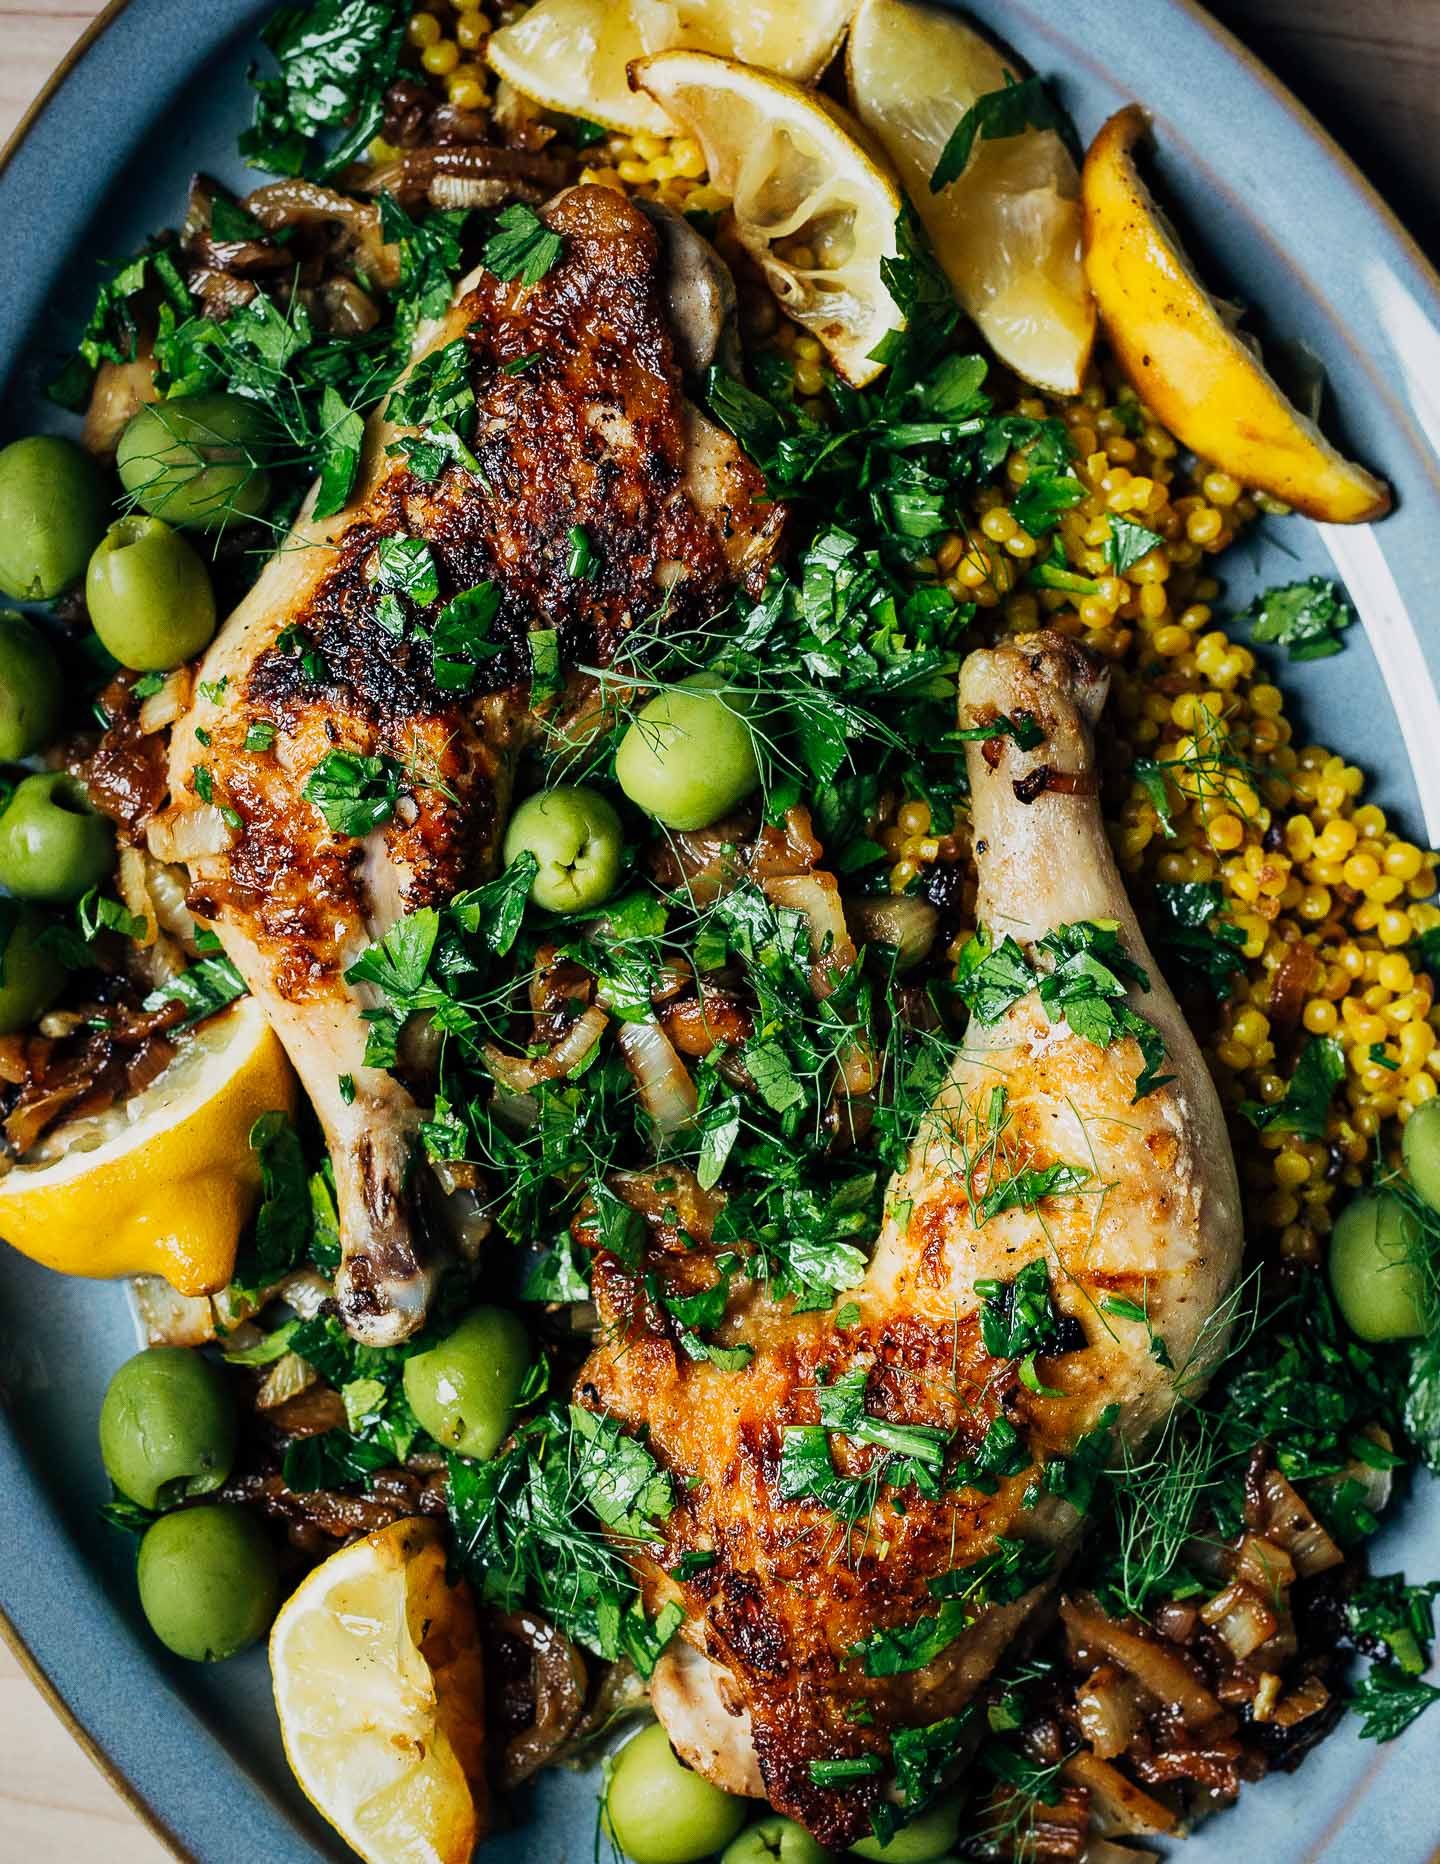 A platter with roasted chicken, couscous, olive, lemons, and herbs.